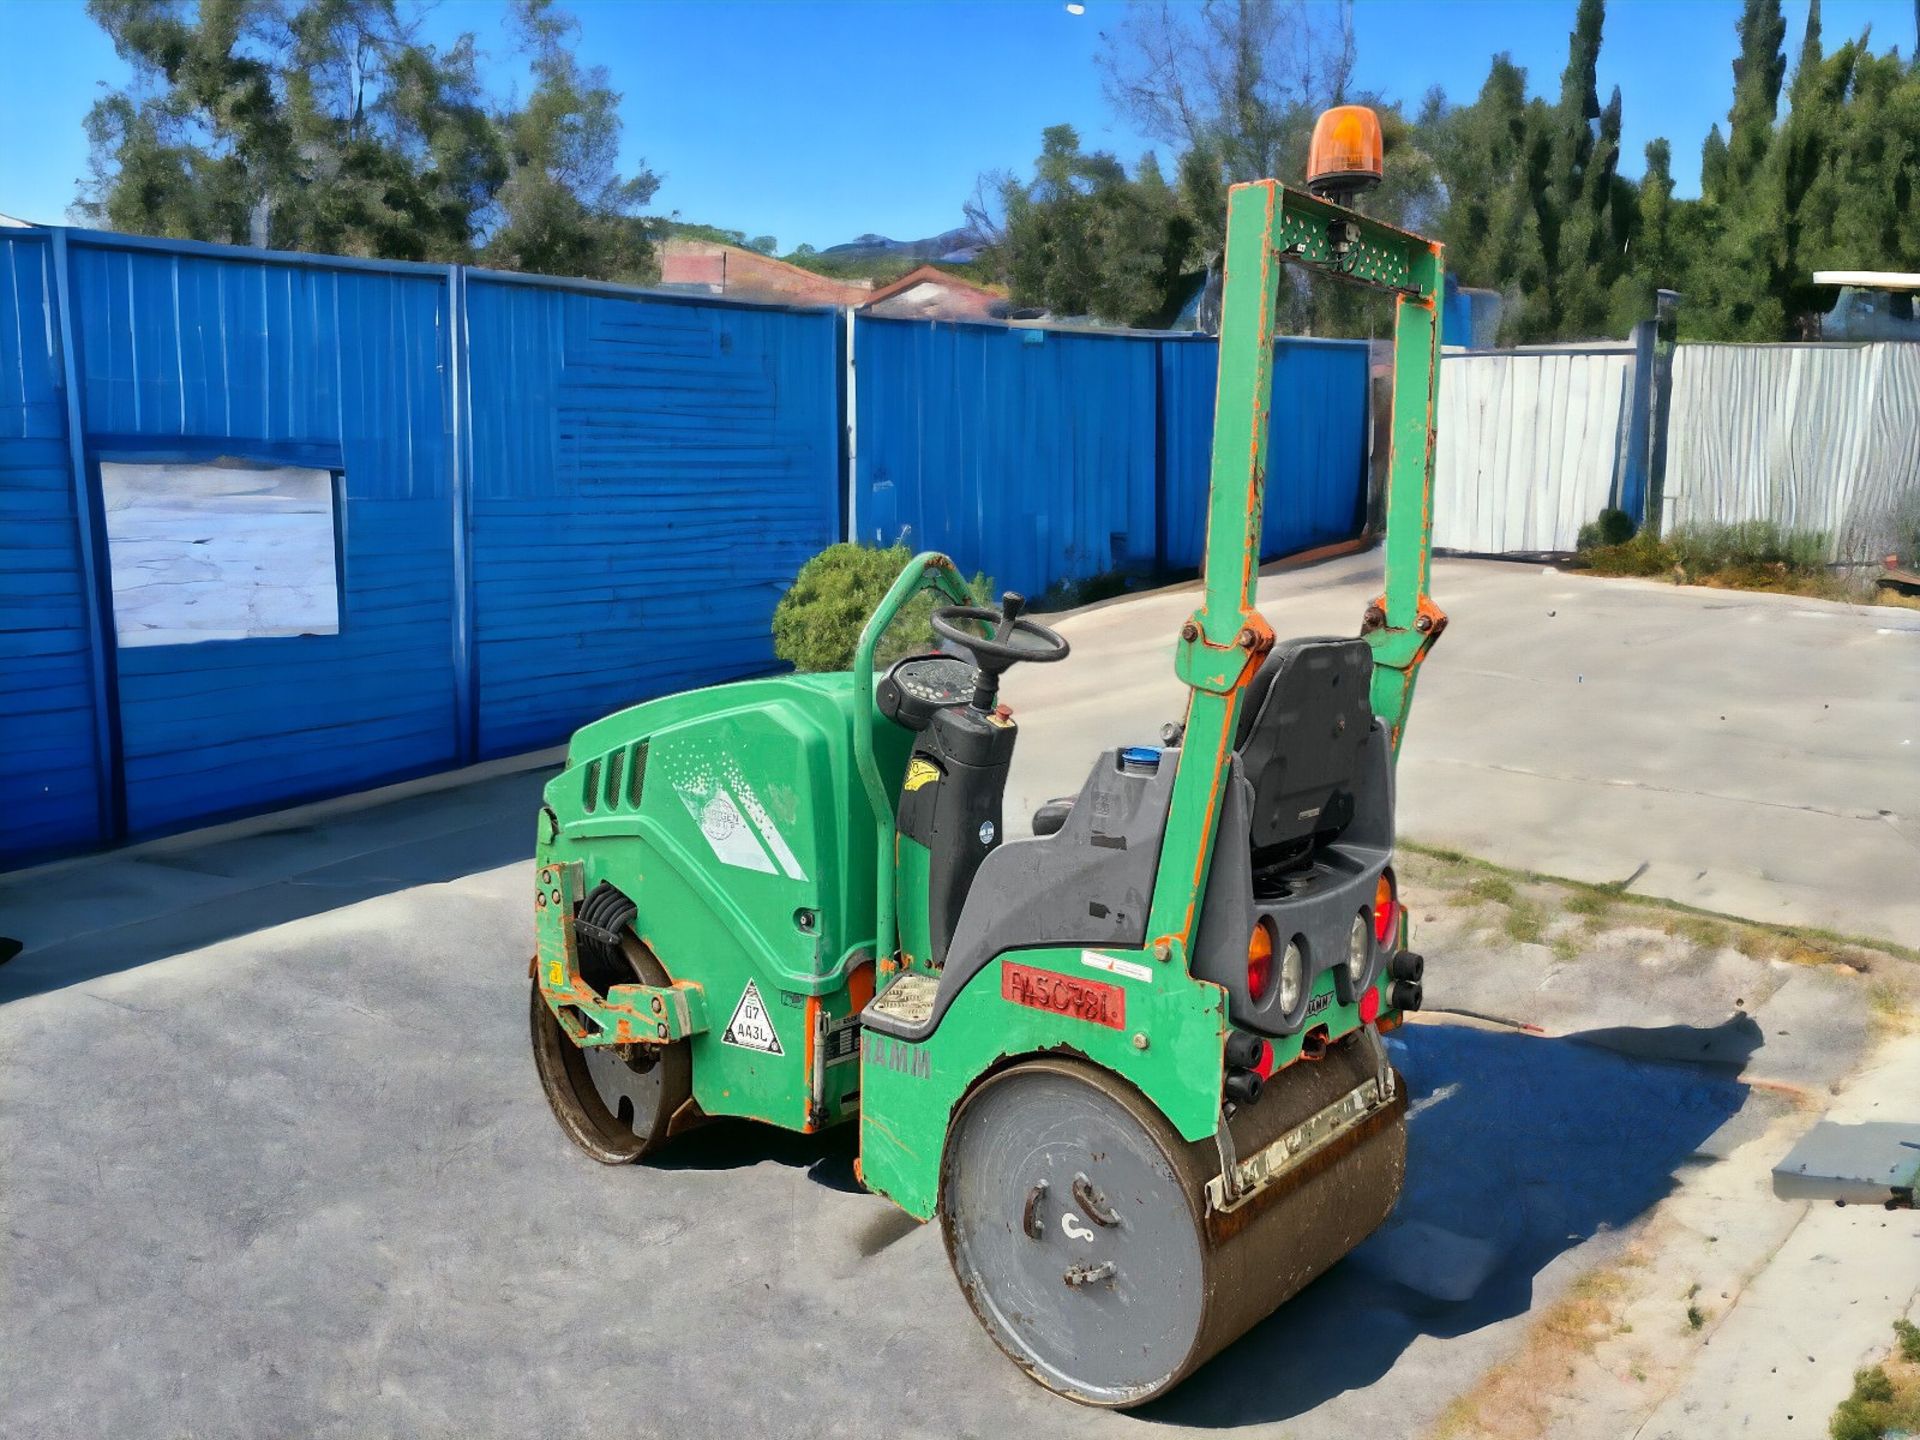 HAMM HD8 VV-H ROLLER - 2007 MODEL: COMPACT, POWERFUL, AND READY TO ROLL